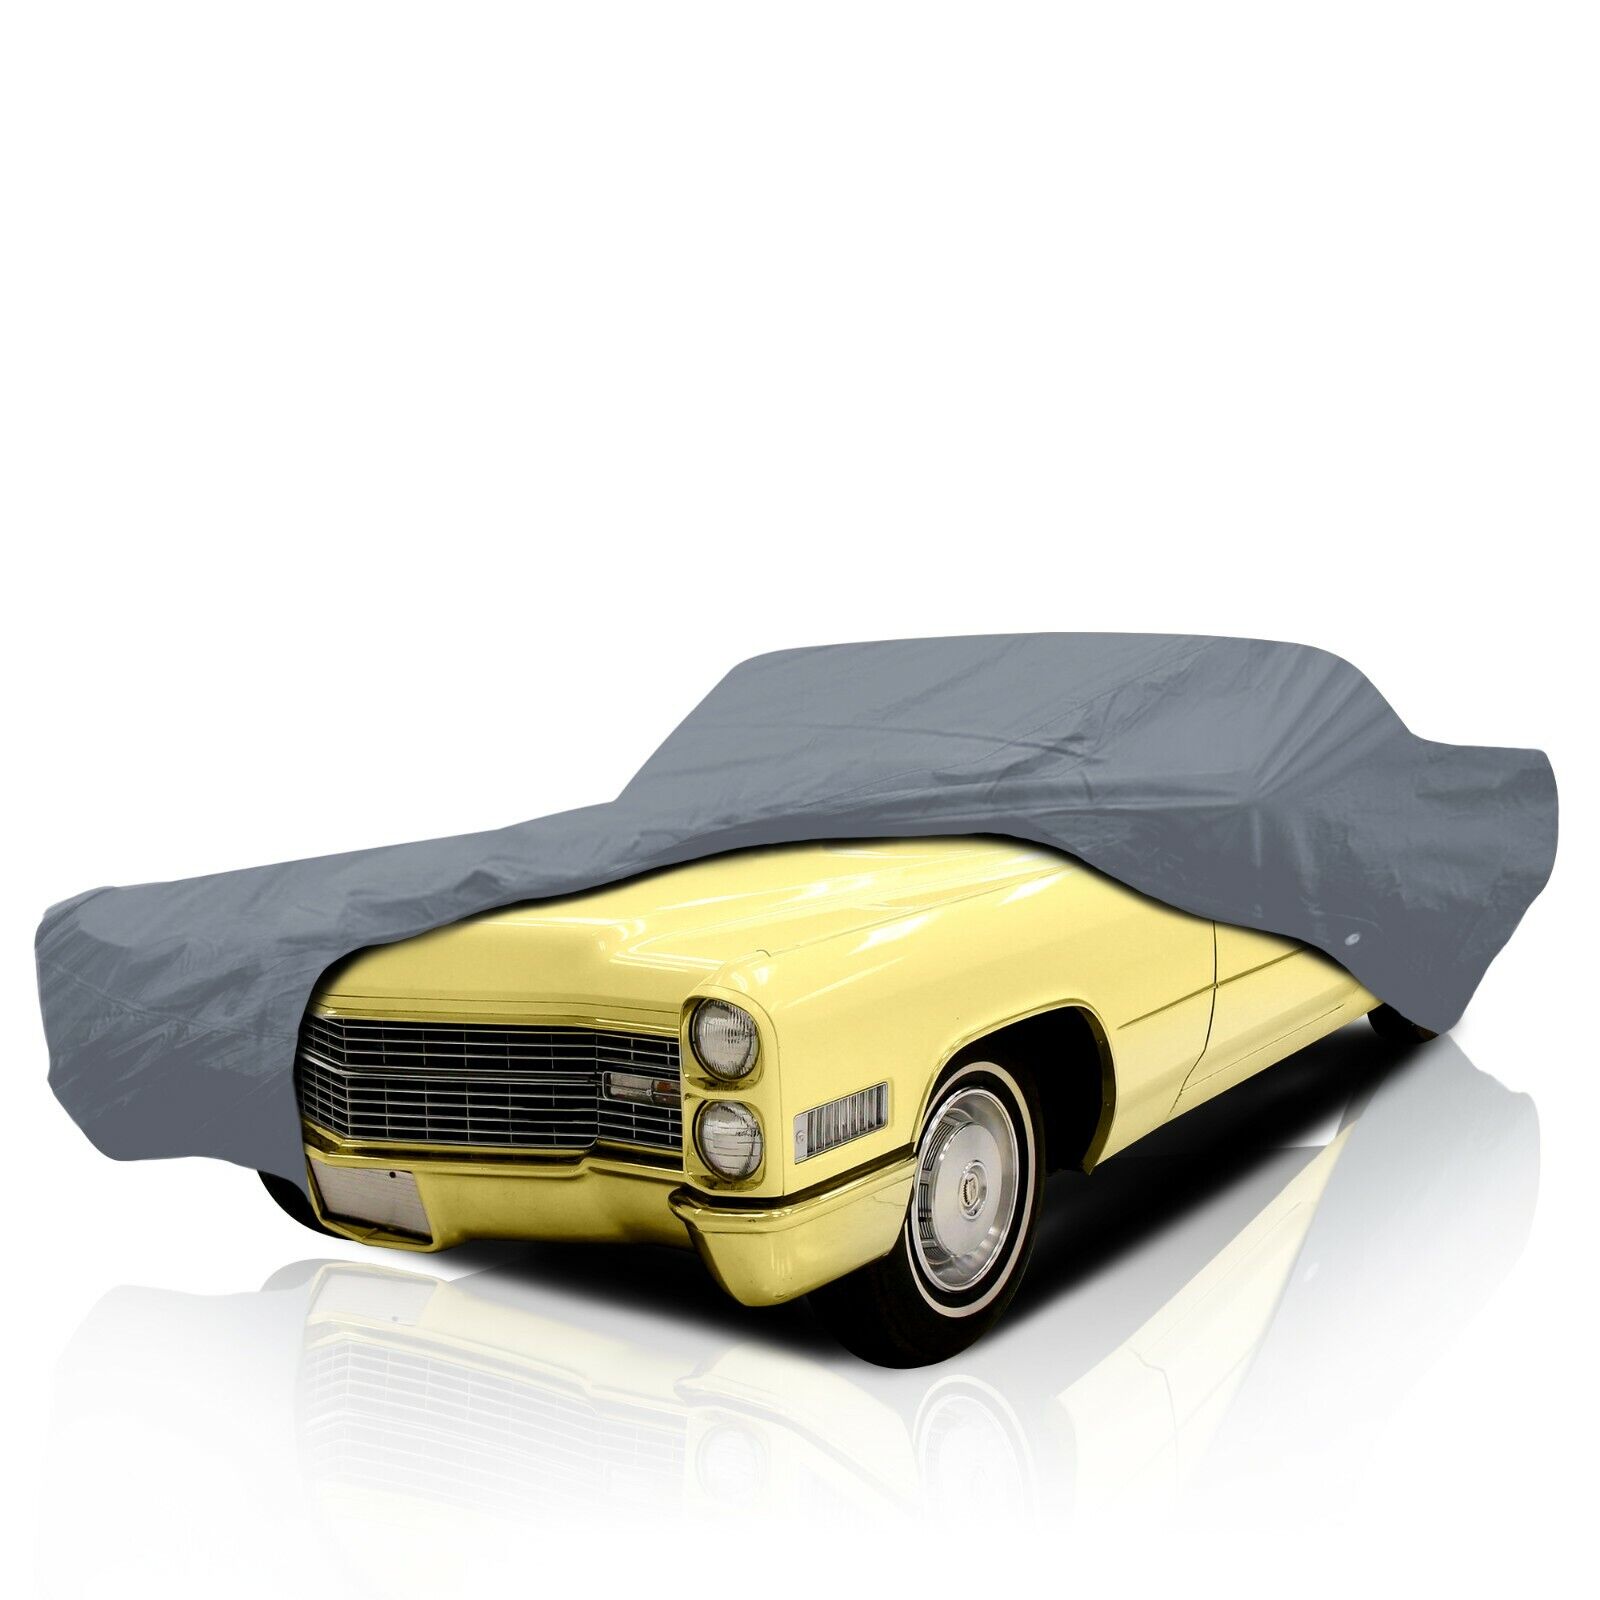 [CCT] 5 Layer Weather/Waterproof Full Car Cover For Cadillac DeVille 1959-2005